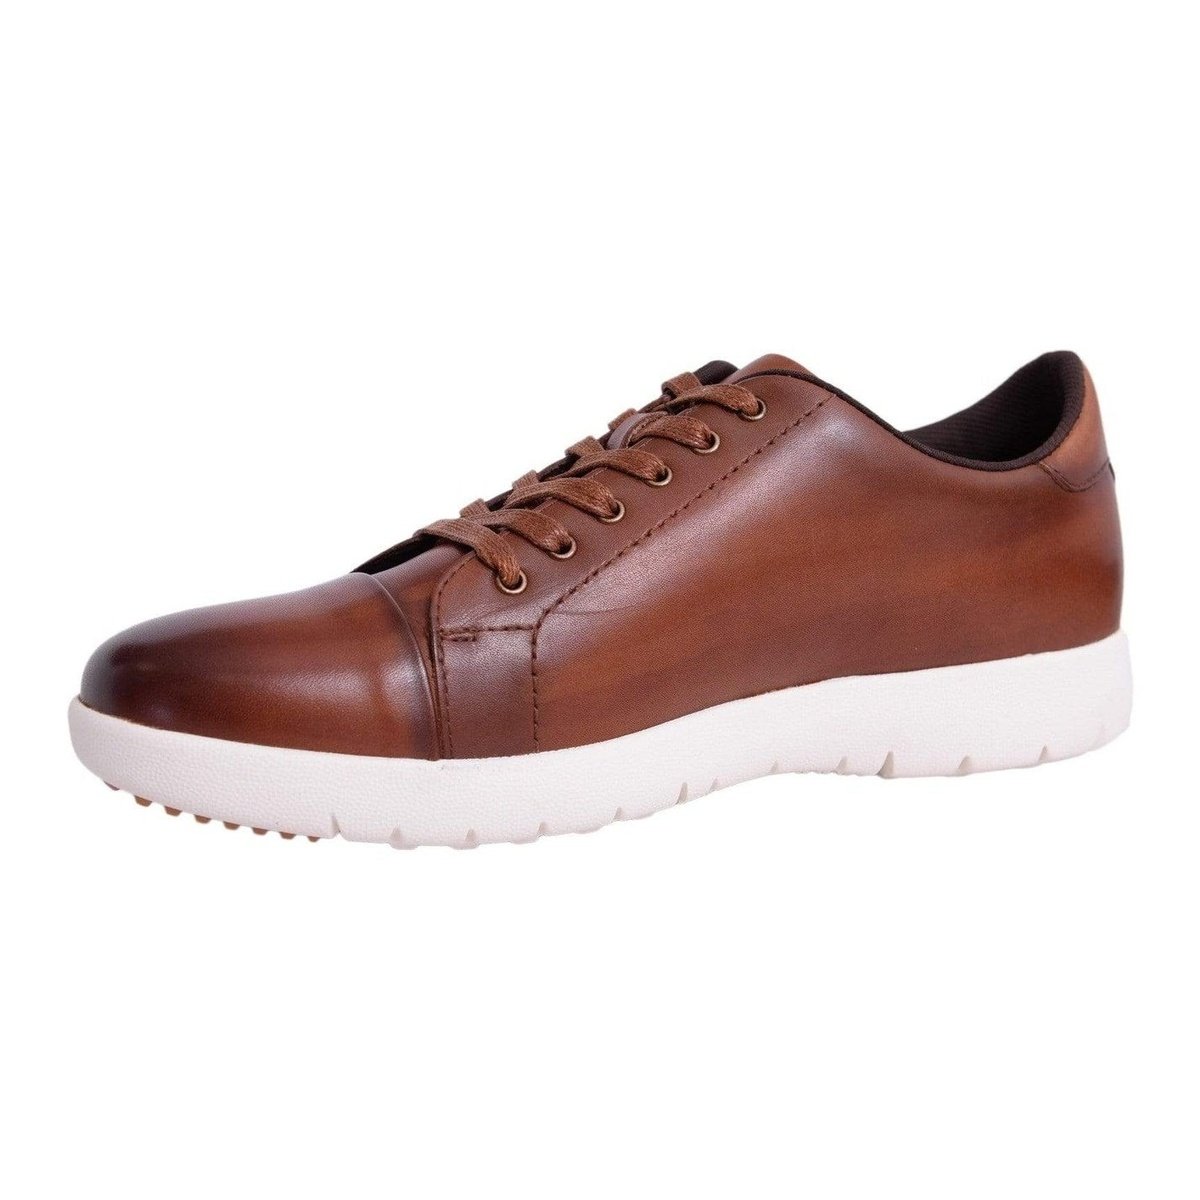 Mens Stacy Adams Cognac Brown Leather Lace Up Versatile Sneakers Casual Shoes - The Suit Depot